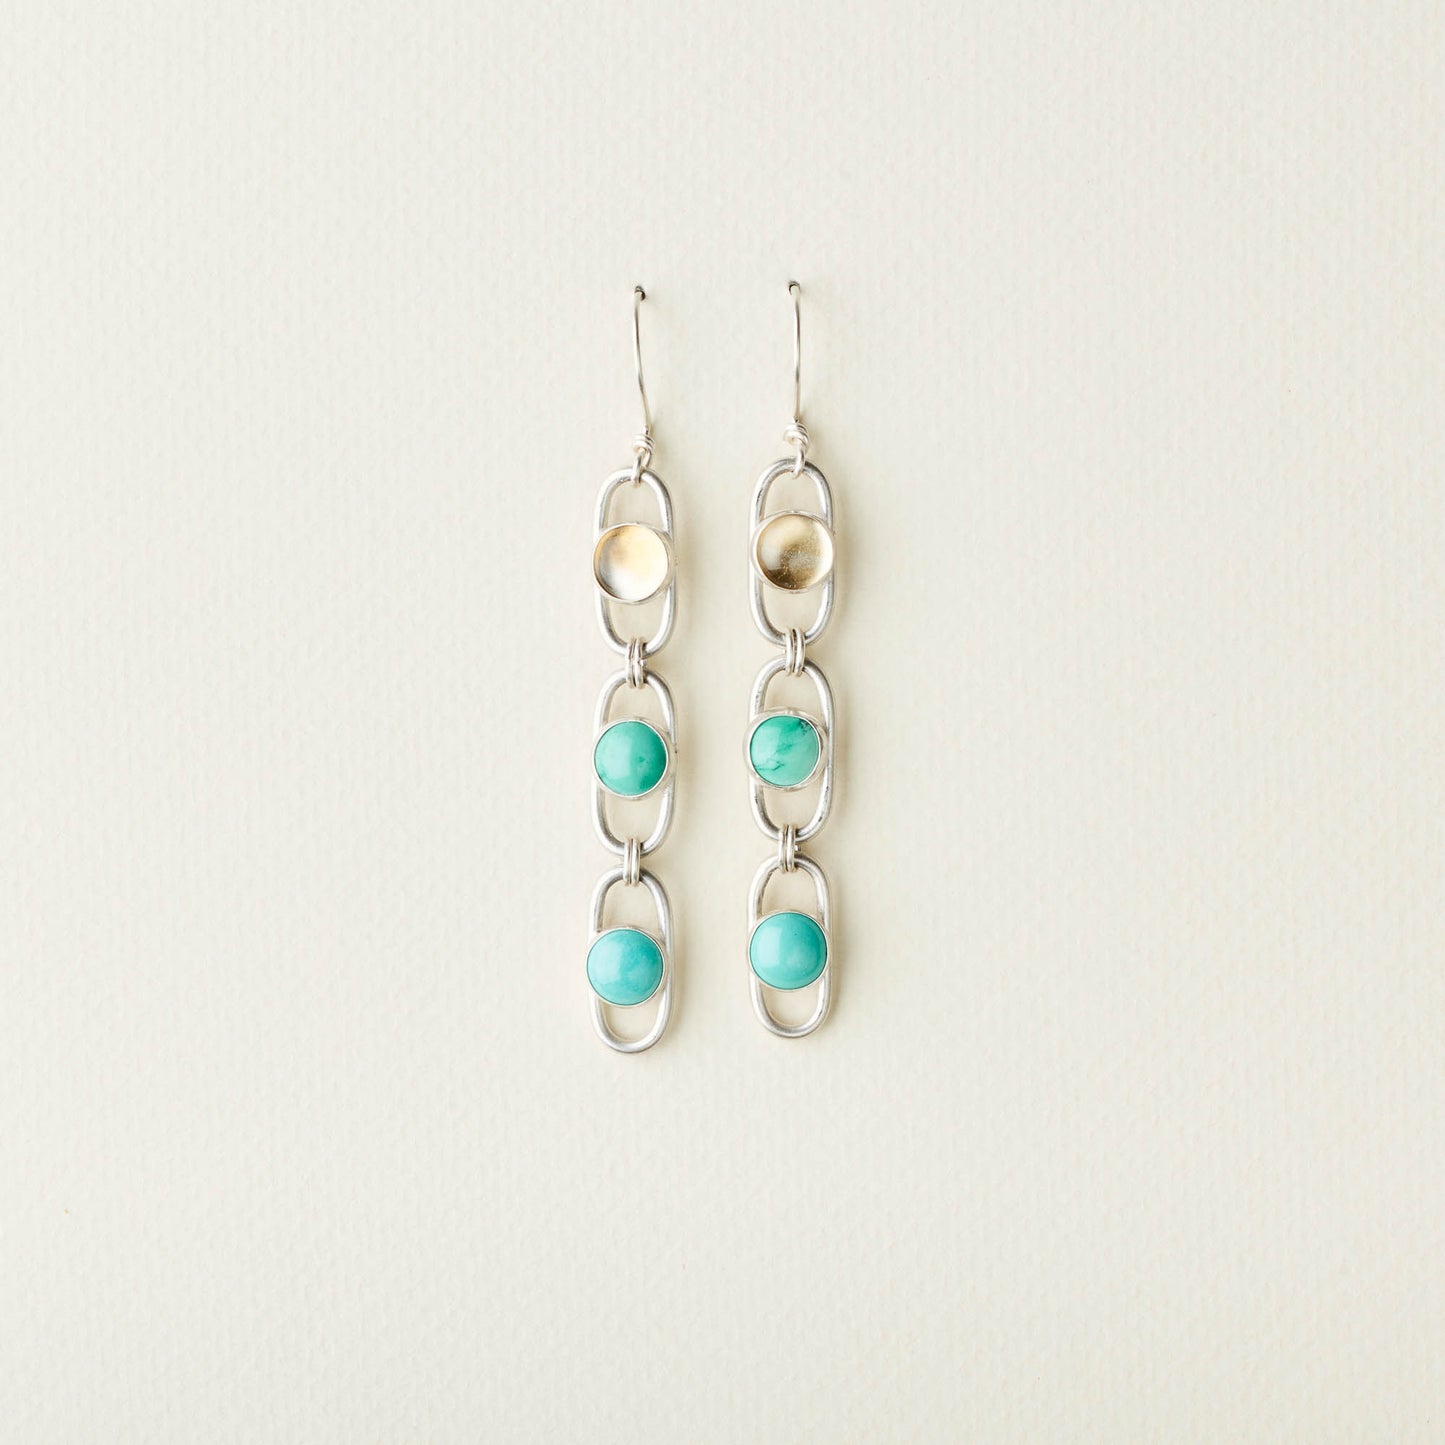 Trickle Earrings :: Citrine & Turquoise Trio